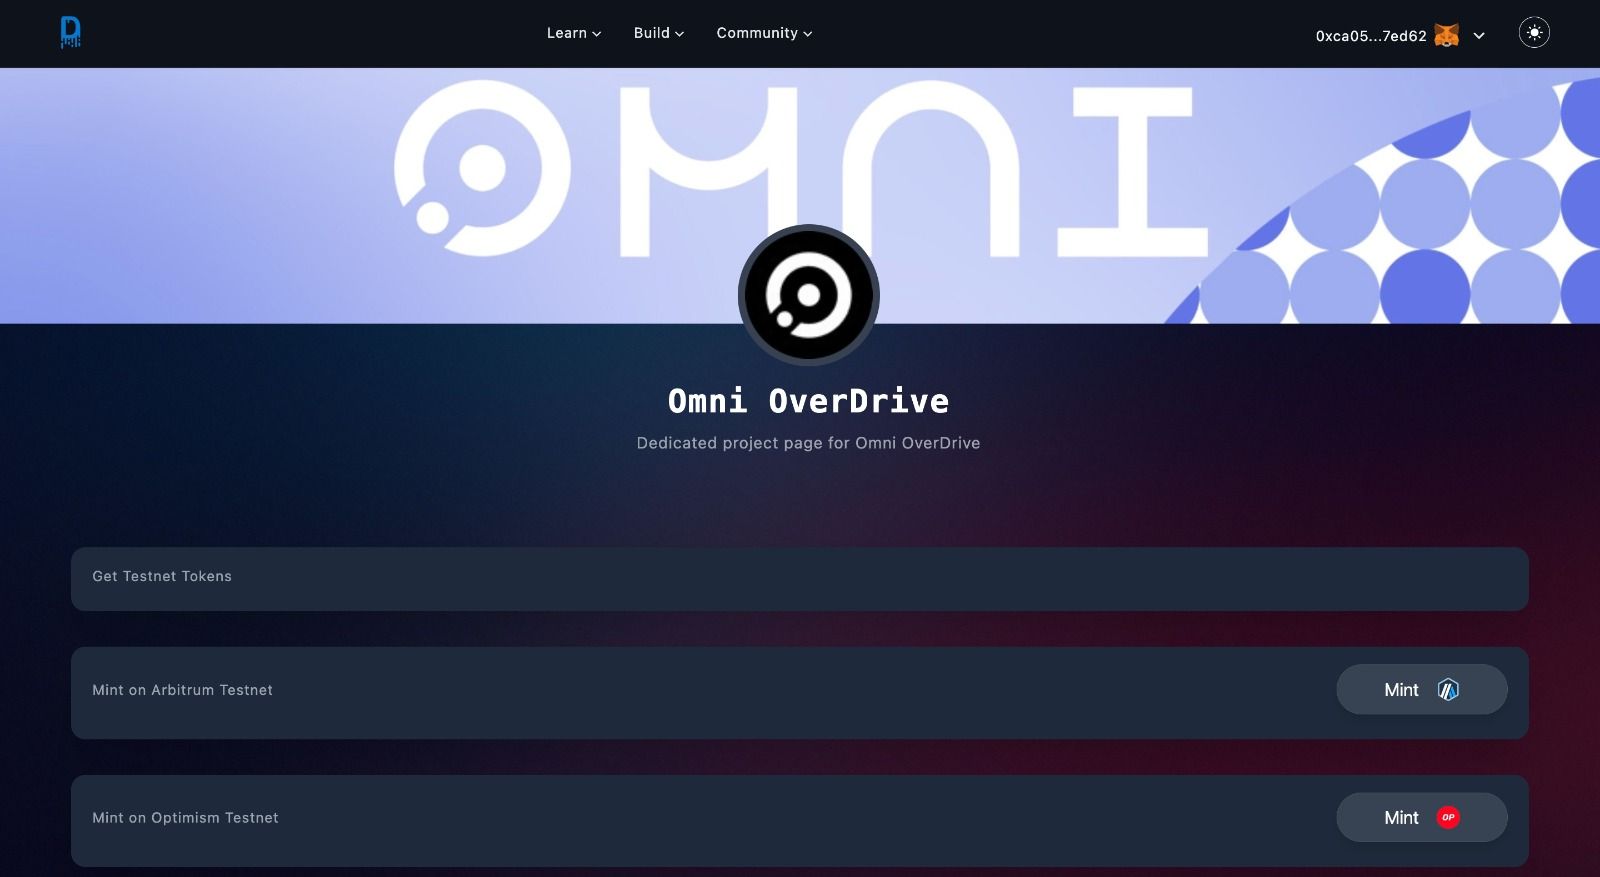 Head over to DripVerse's Omni Overdrive Project & Connect Your Wallet